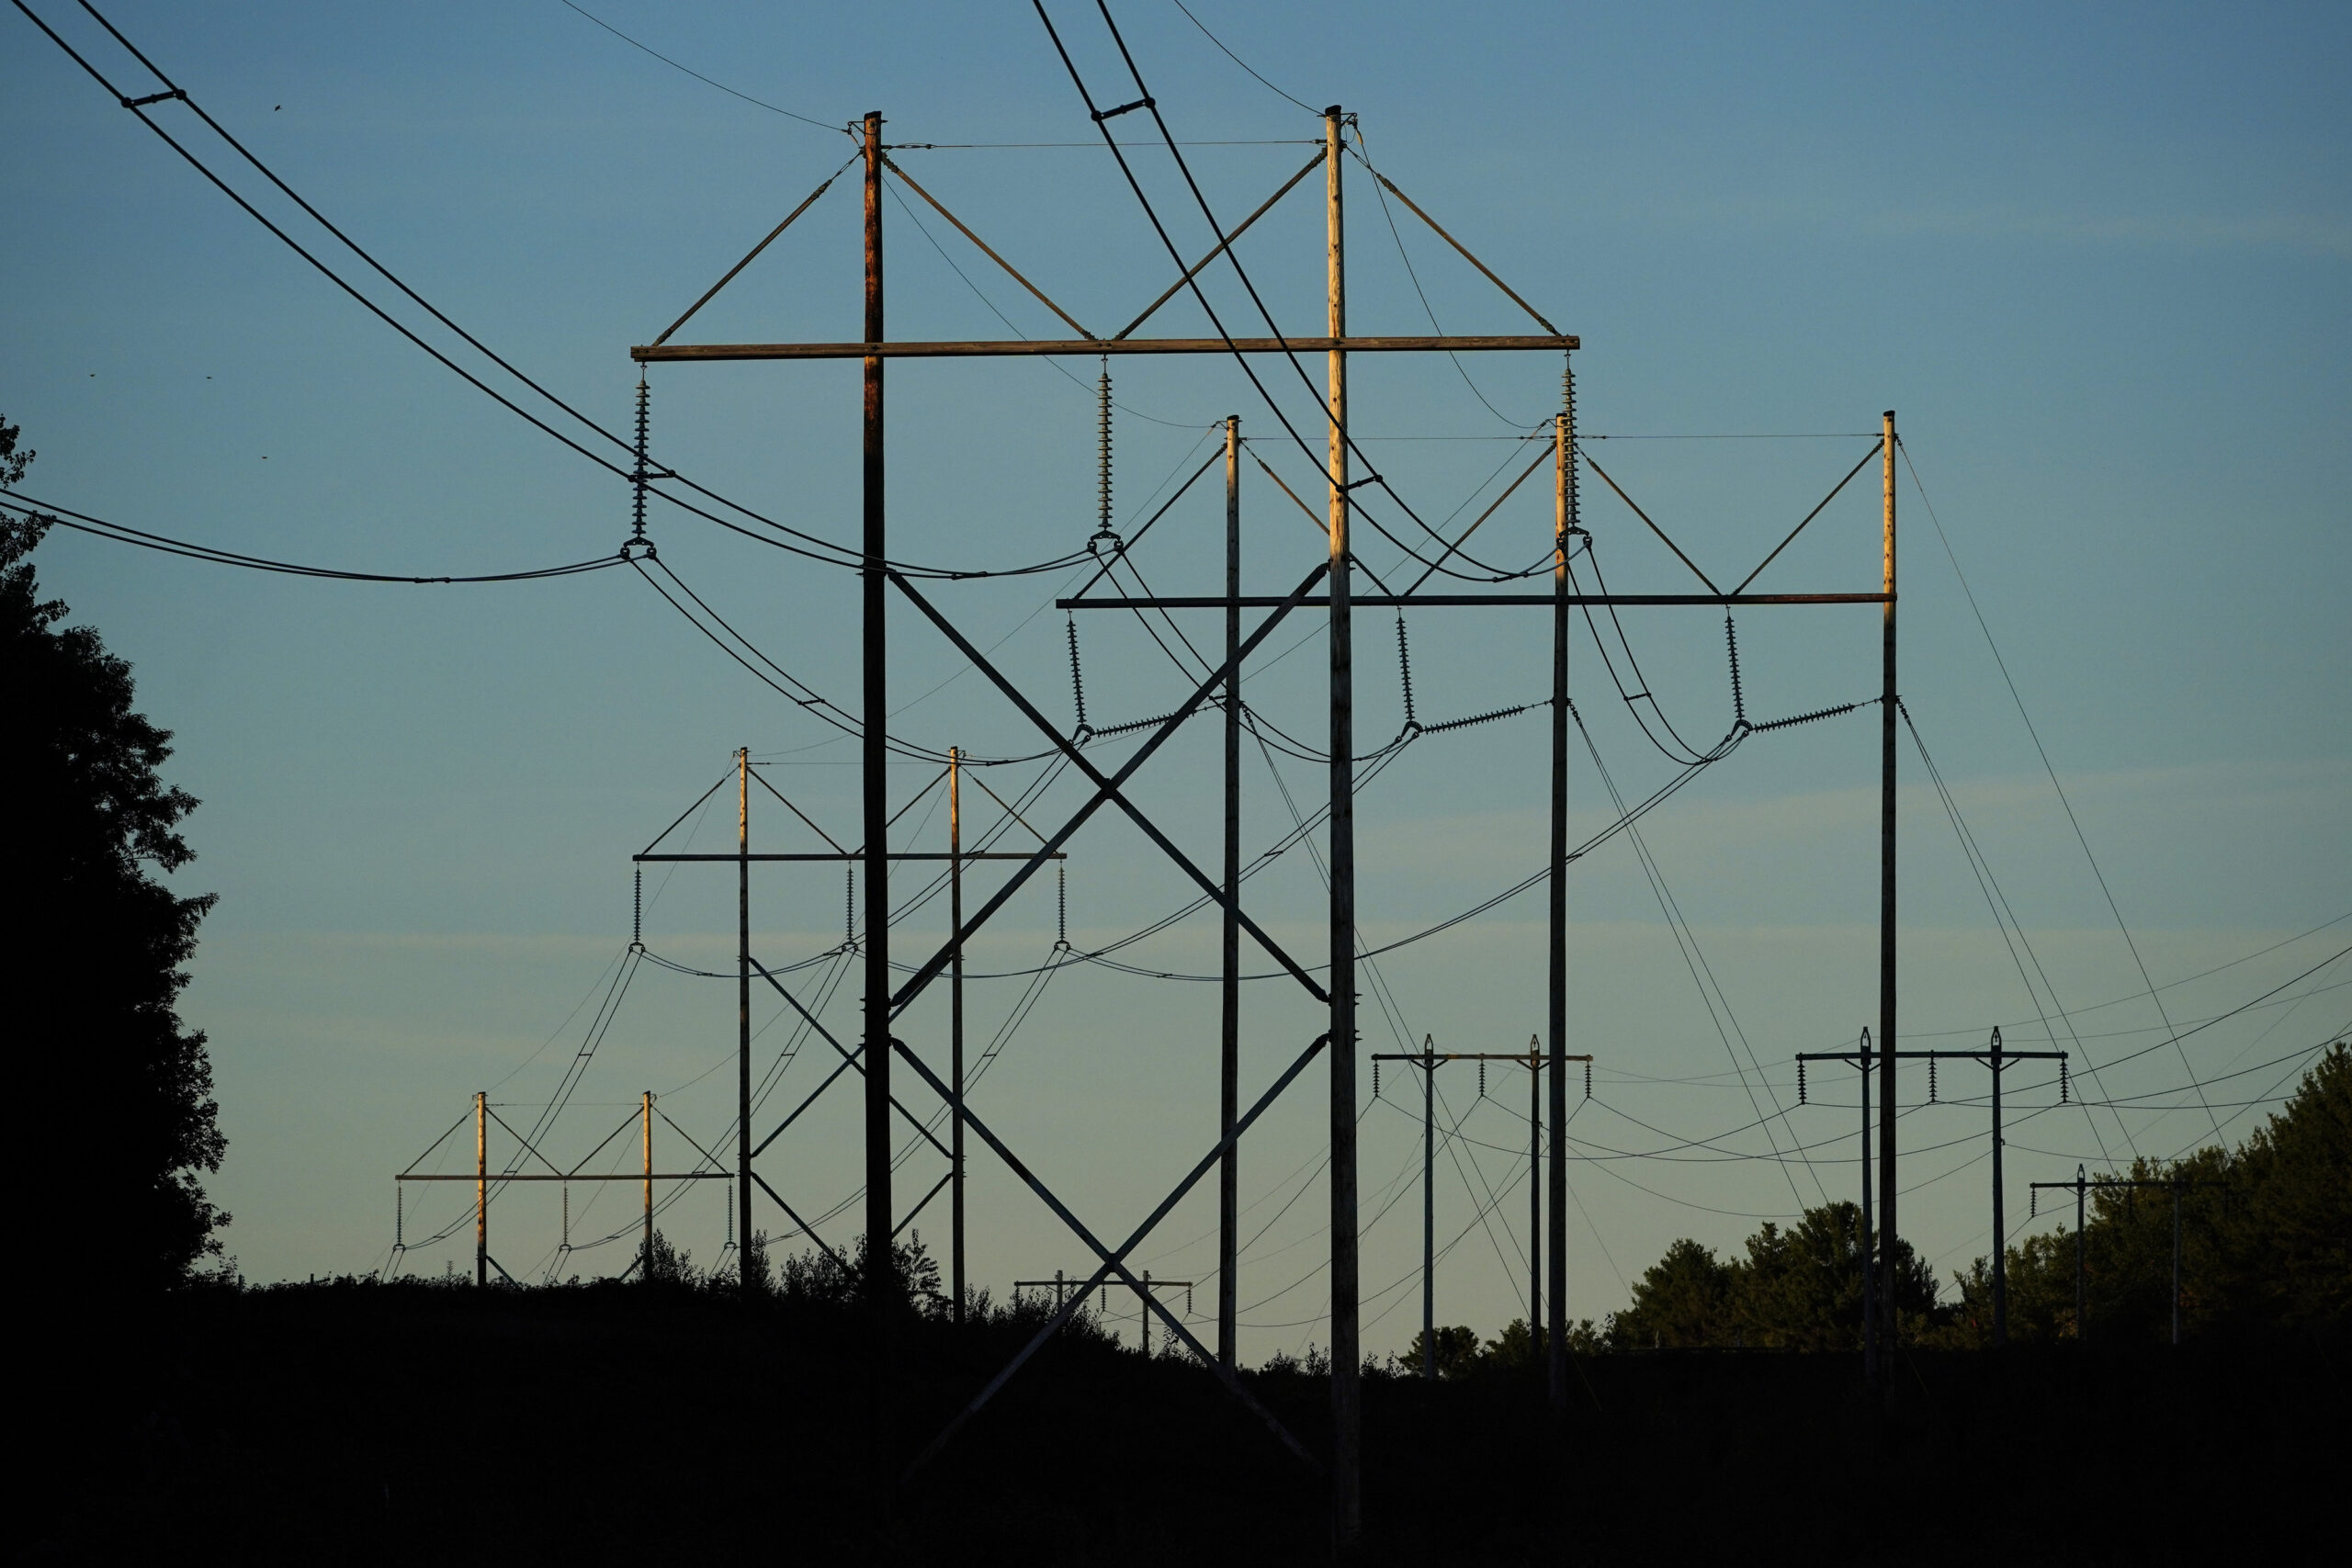 Half of a controversial transmission line comes online in Wisconsin